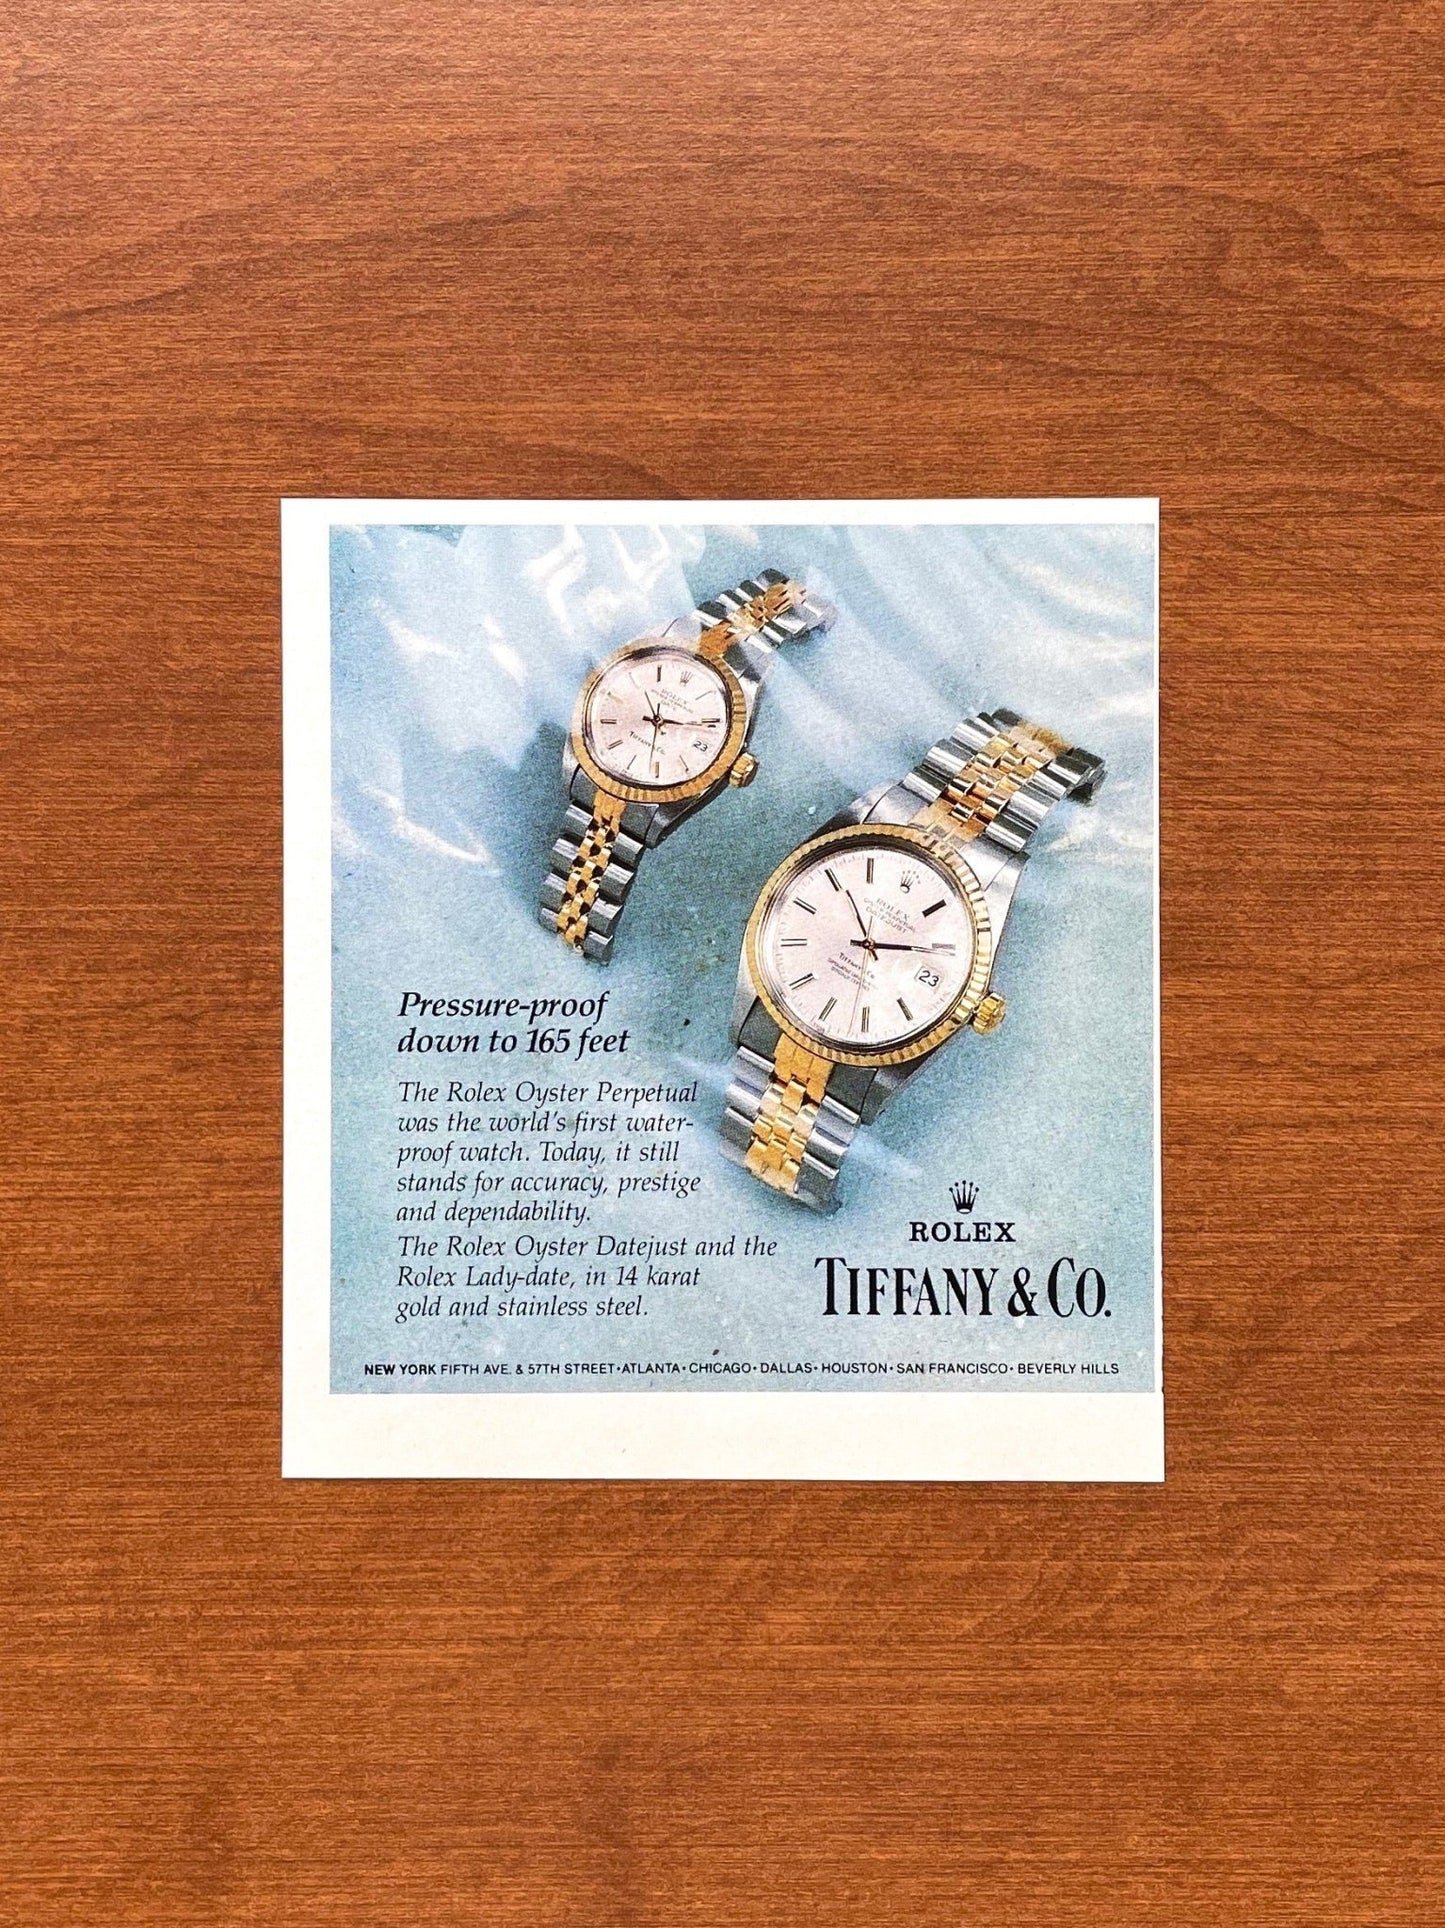 1983 Rolex Datejust Ref. 16013 and Lady-Date at Tiffany & Co. Advertisement